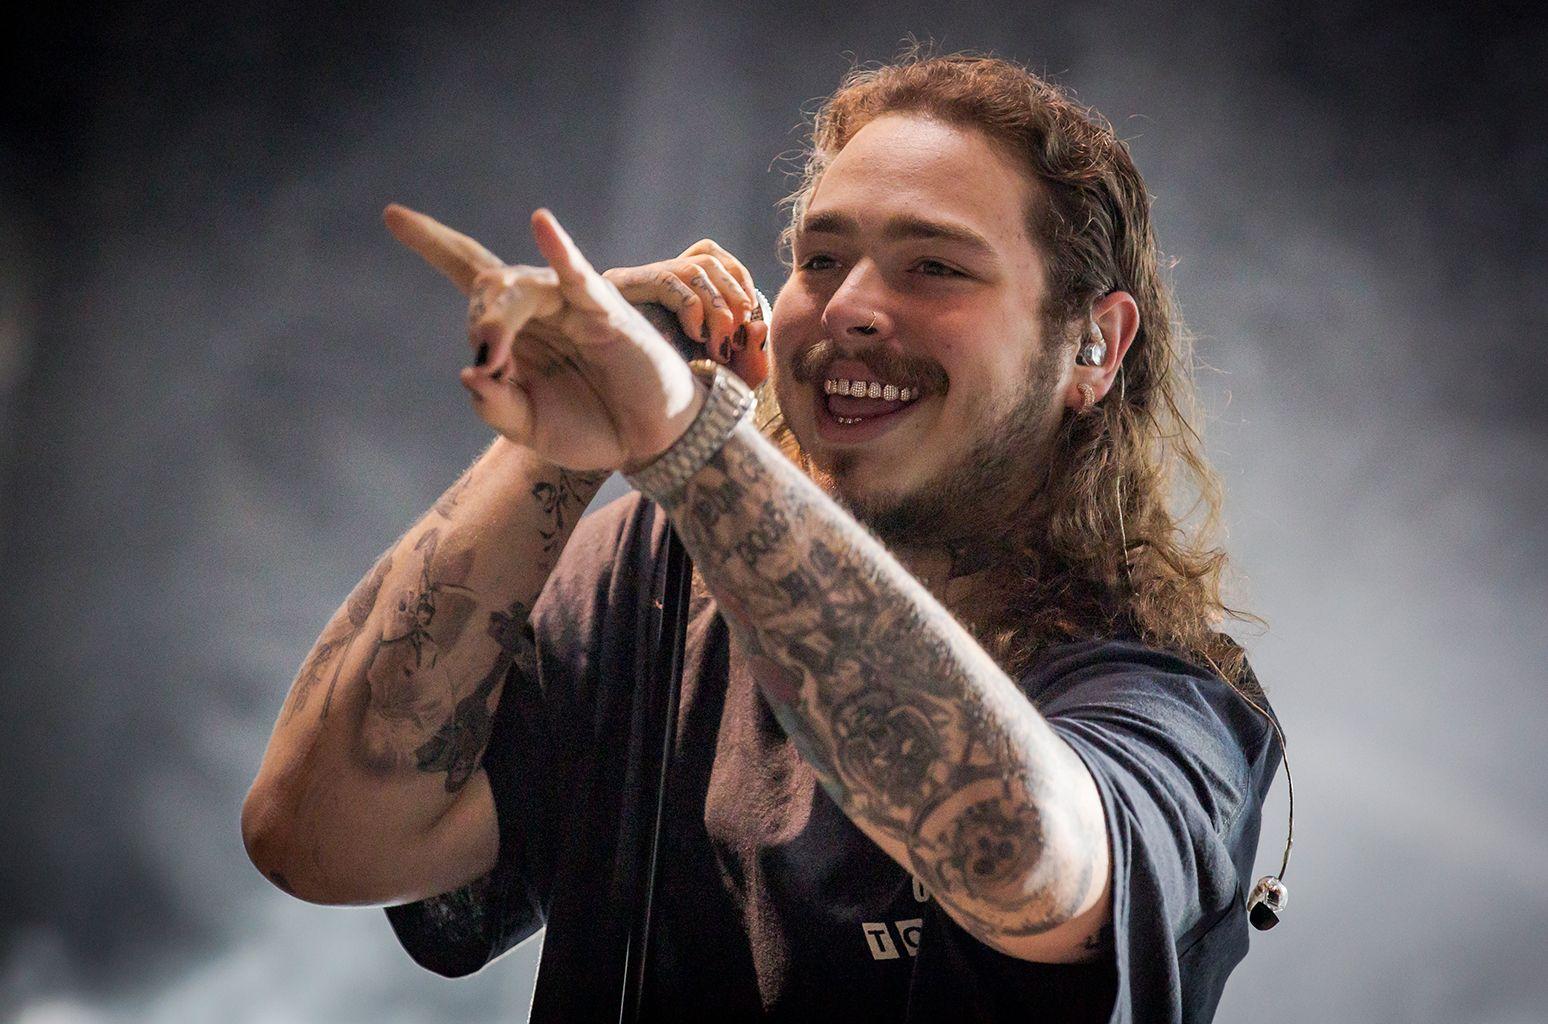 Post Malone 2018 Wallpapers - Wallpaper Cave